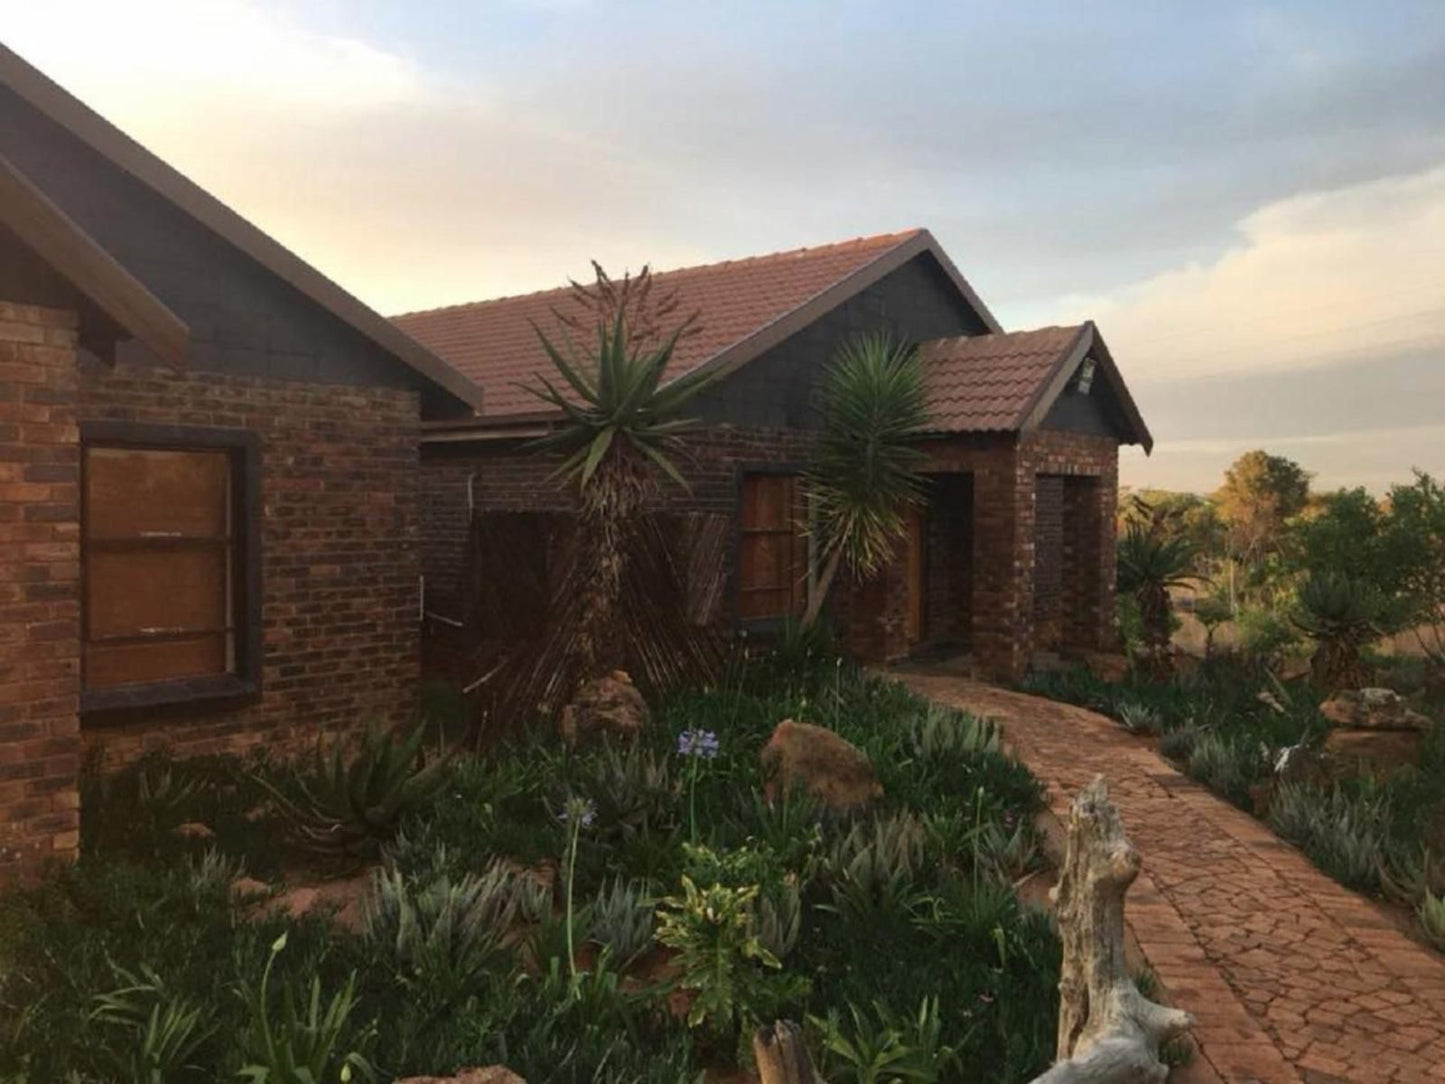 Luiperdloop Lodge Melkrivier Limpopo Province South Africa House, Building, Architecture